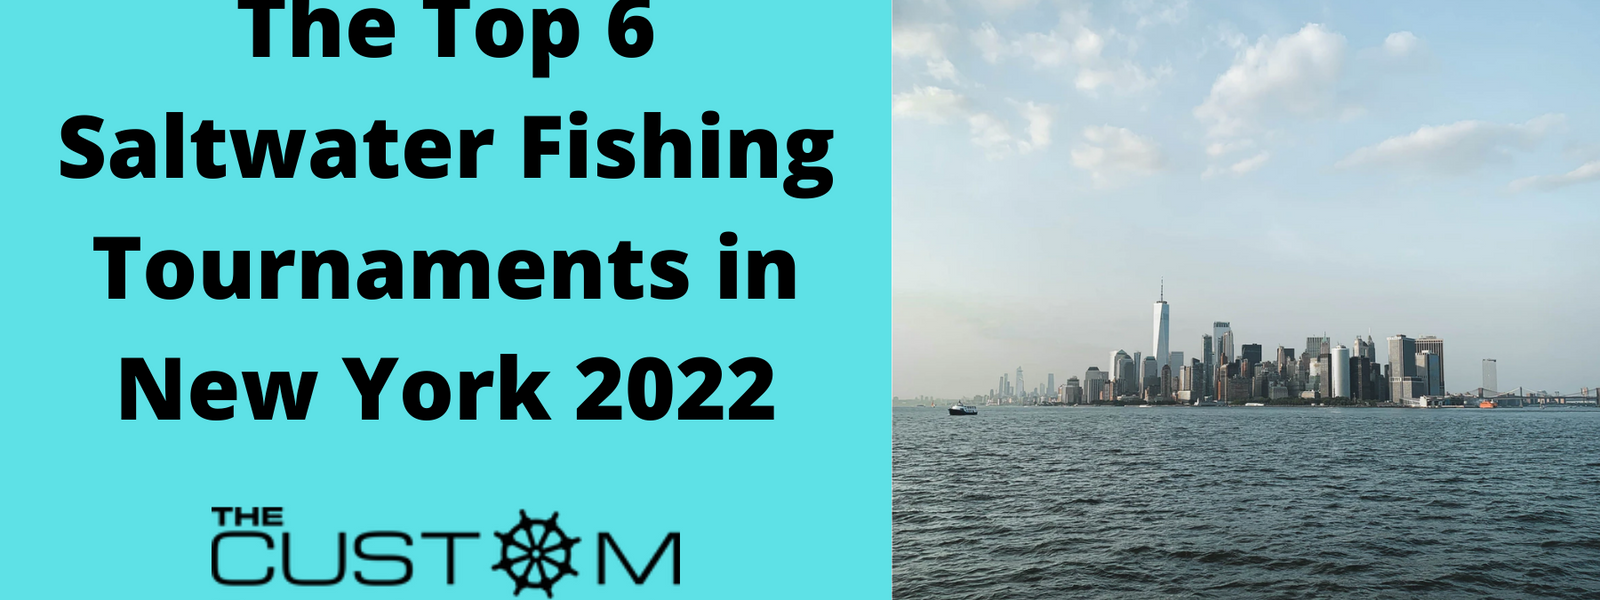 The Top 6 Saltwater Fishing Tournaments in New York 2022